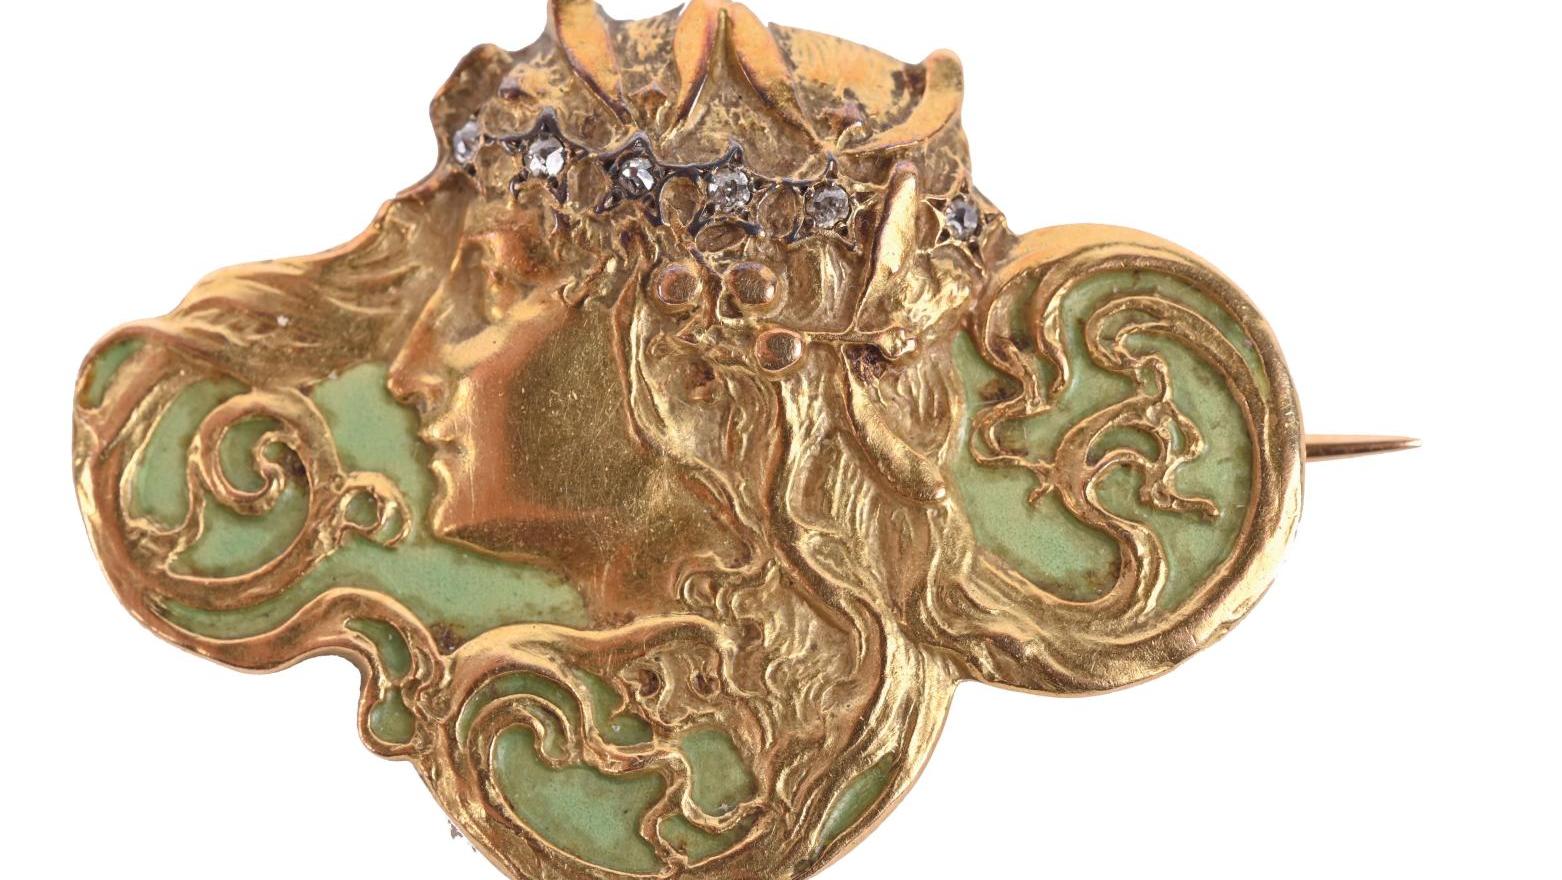 Lalique, signed yellow gold and celadon enamel brooch, rose-cut diamonds, enameled... Lalique’s Inspired Art Nouveau Jewelry